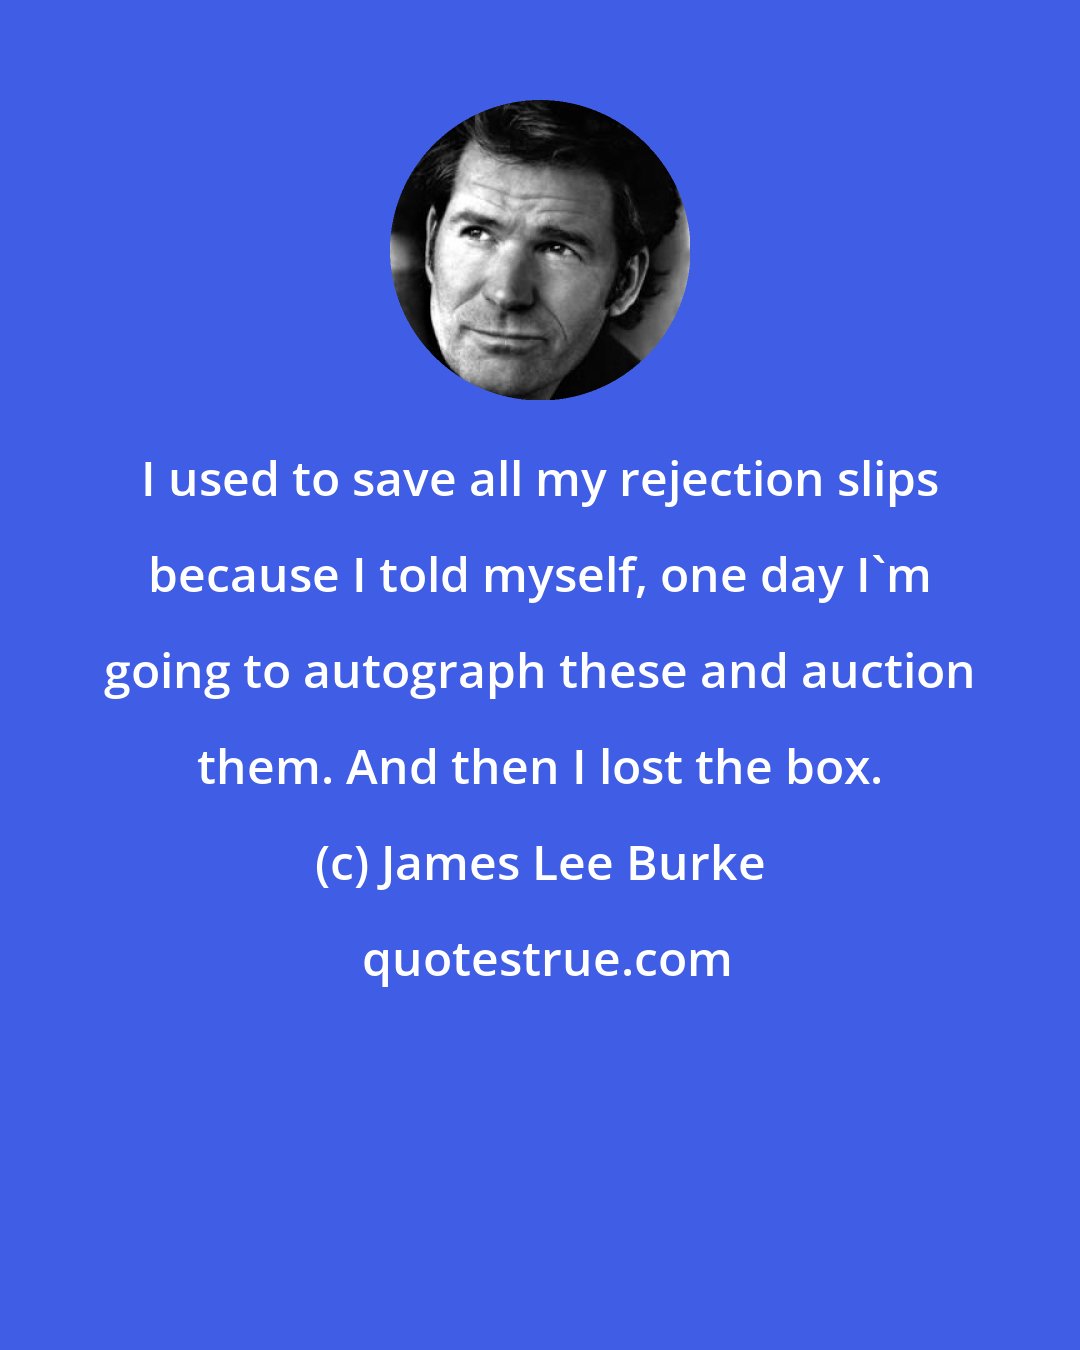 James Lee Burke: I used to save all my rejection slips because I told myself, one day I'm going to autograph these and auction them. And then I lost the box.